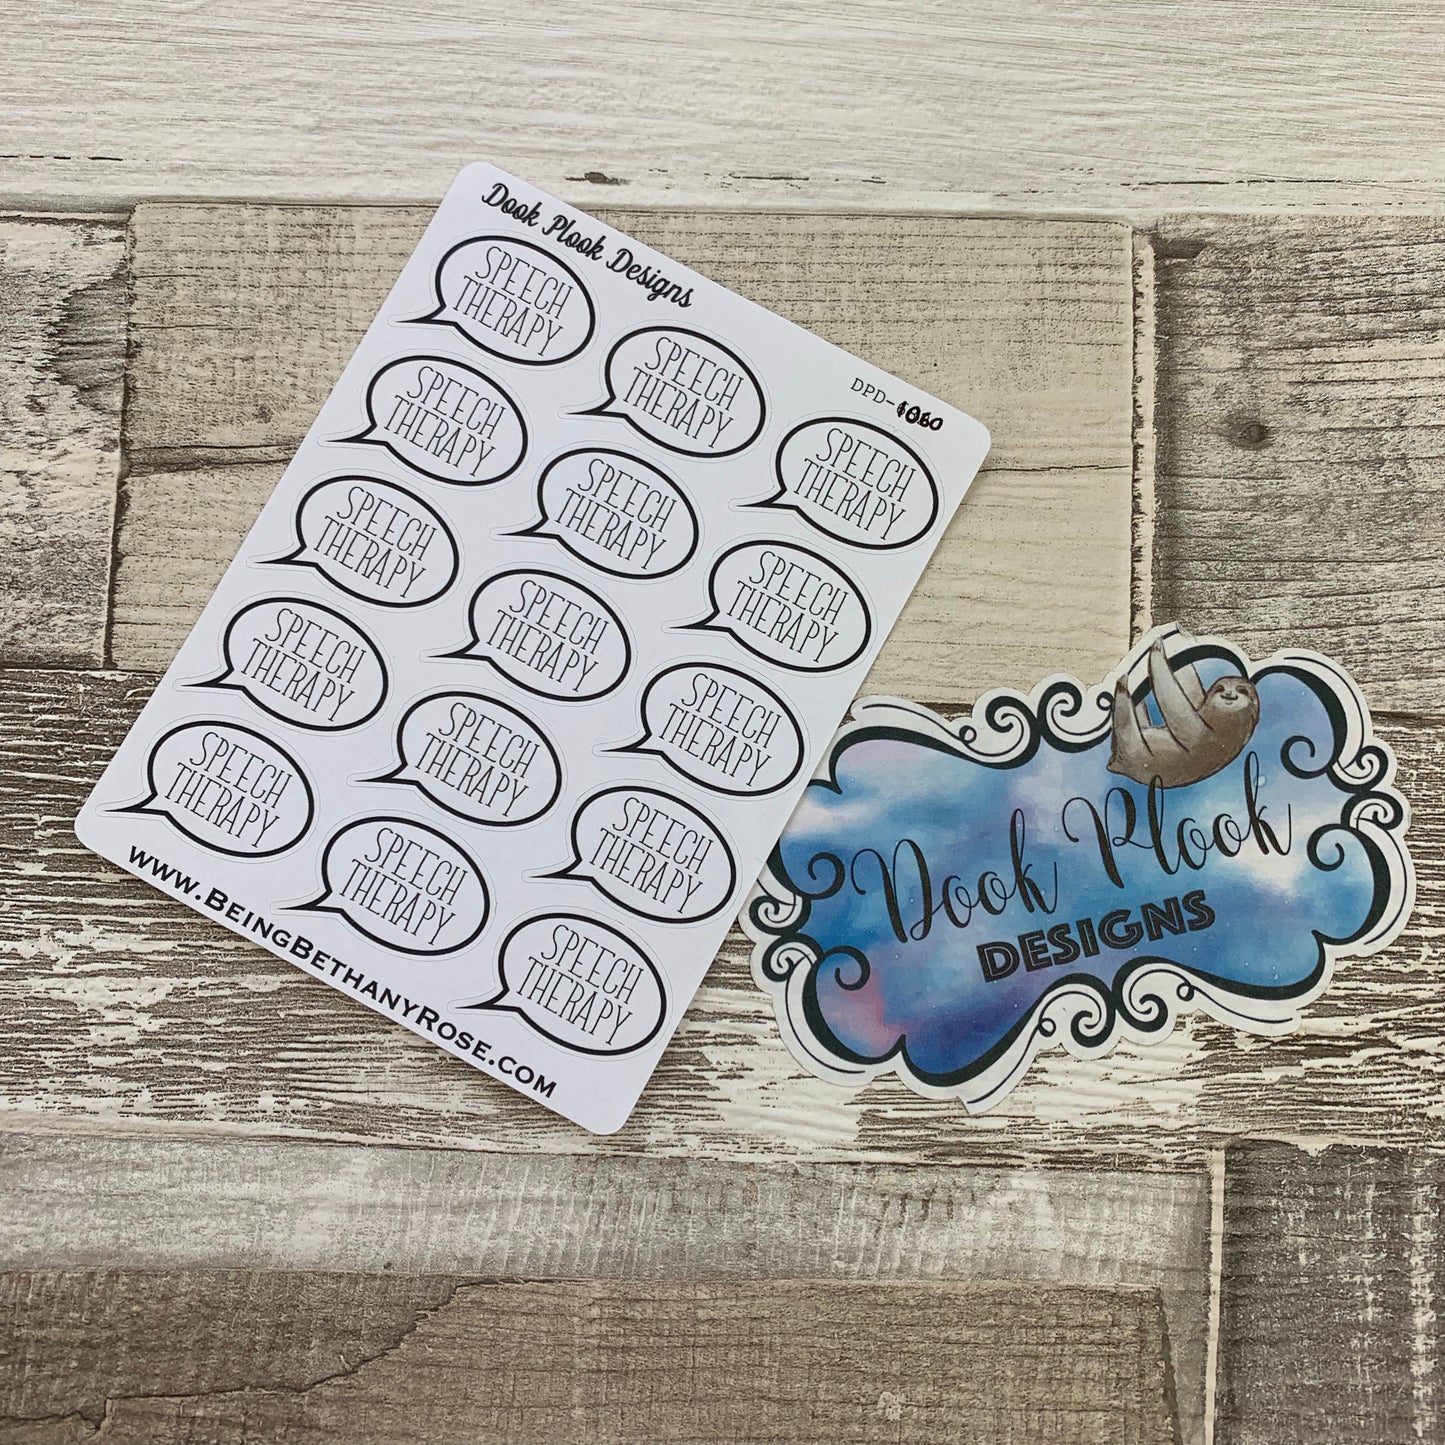 Speech therapy stickers (DPD1060)